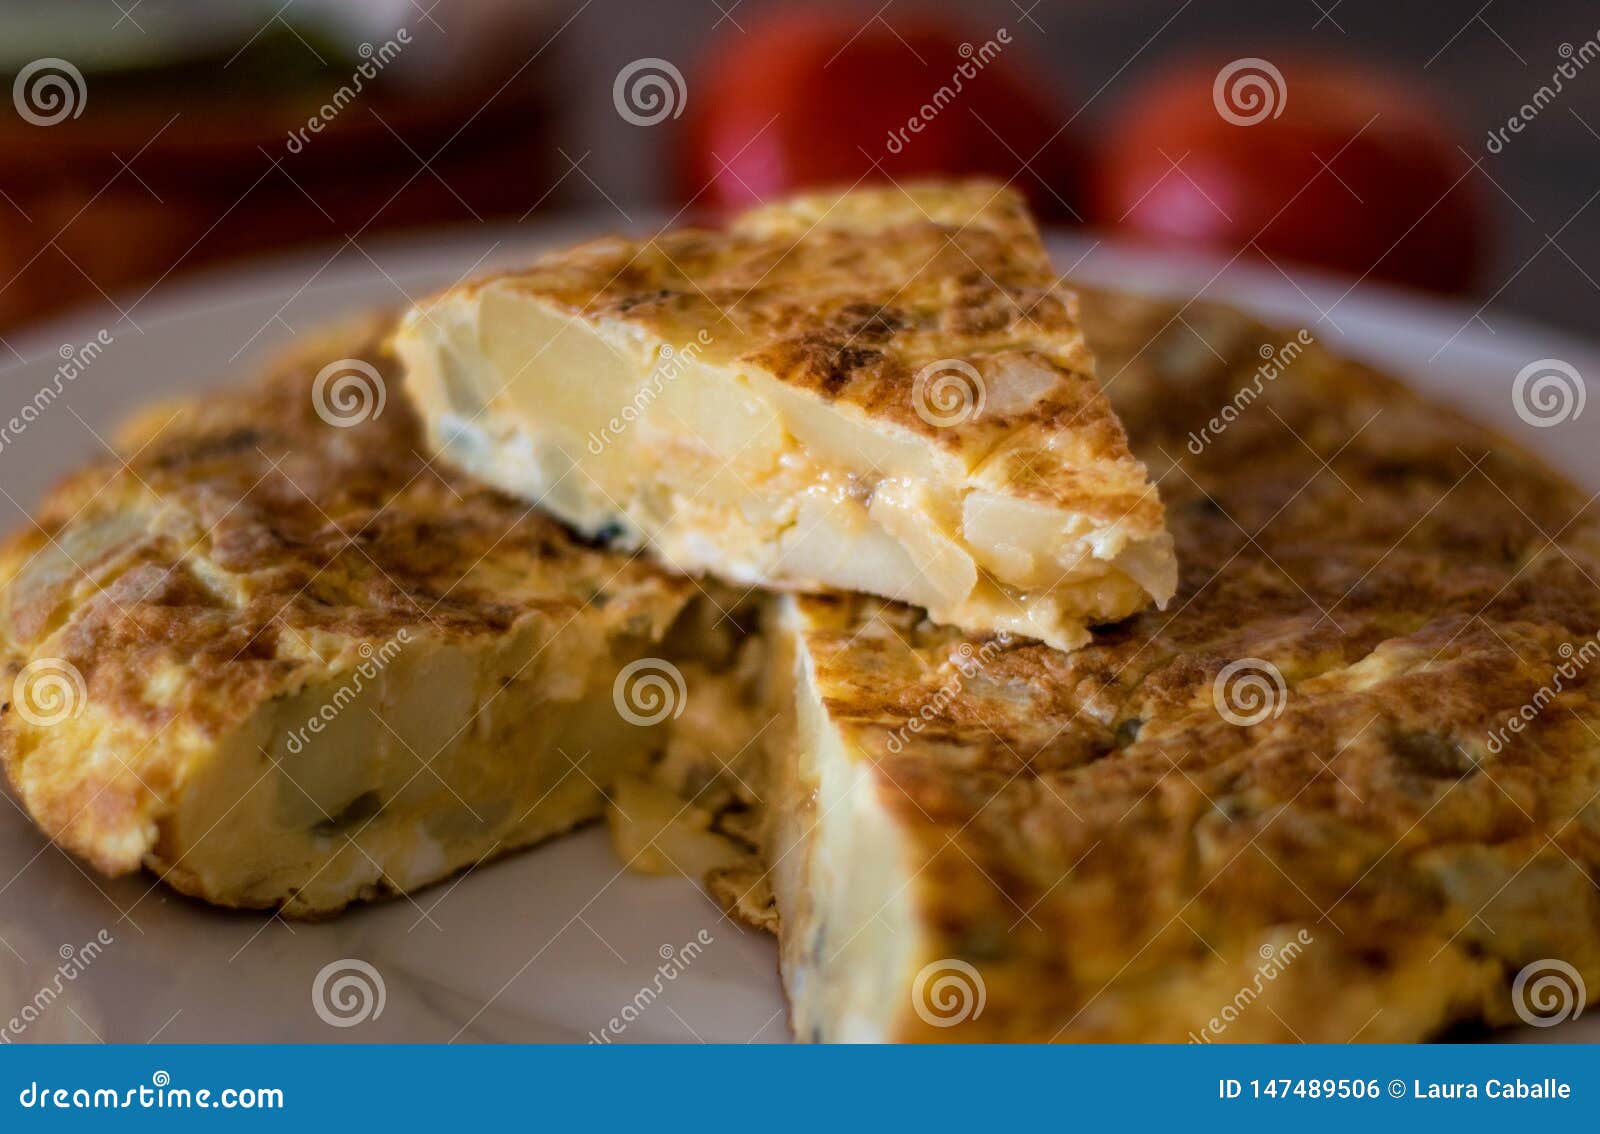 spanish omelete in a plate